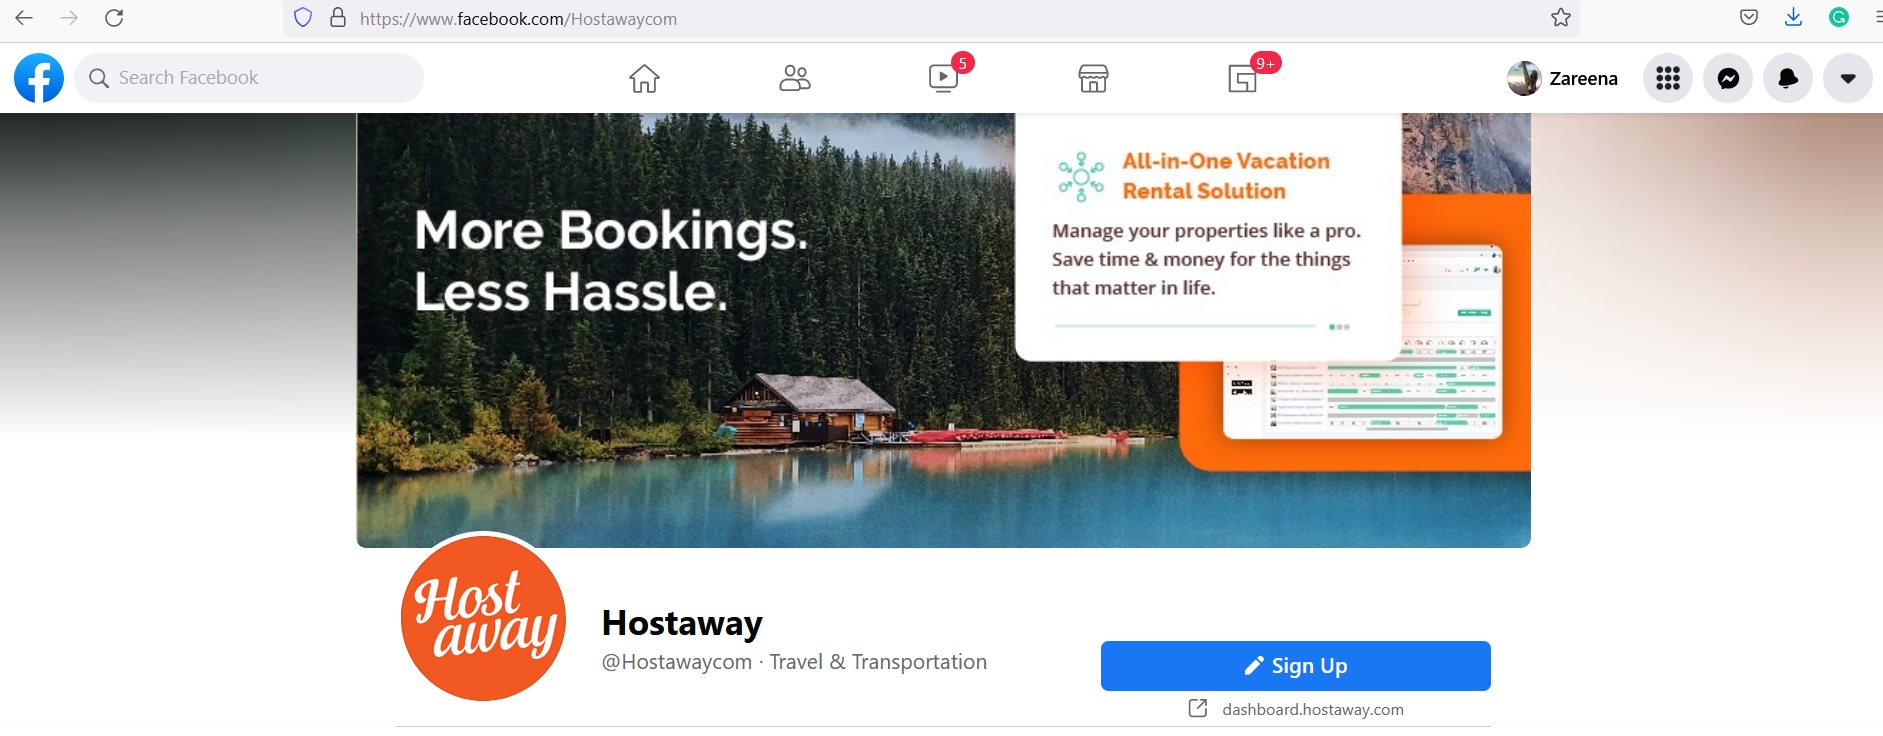 Reasons To Use Facebook For Your Vacation Rental Business